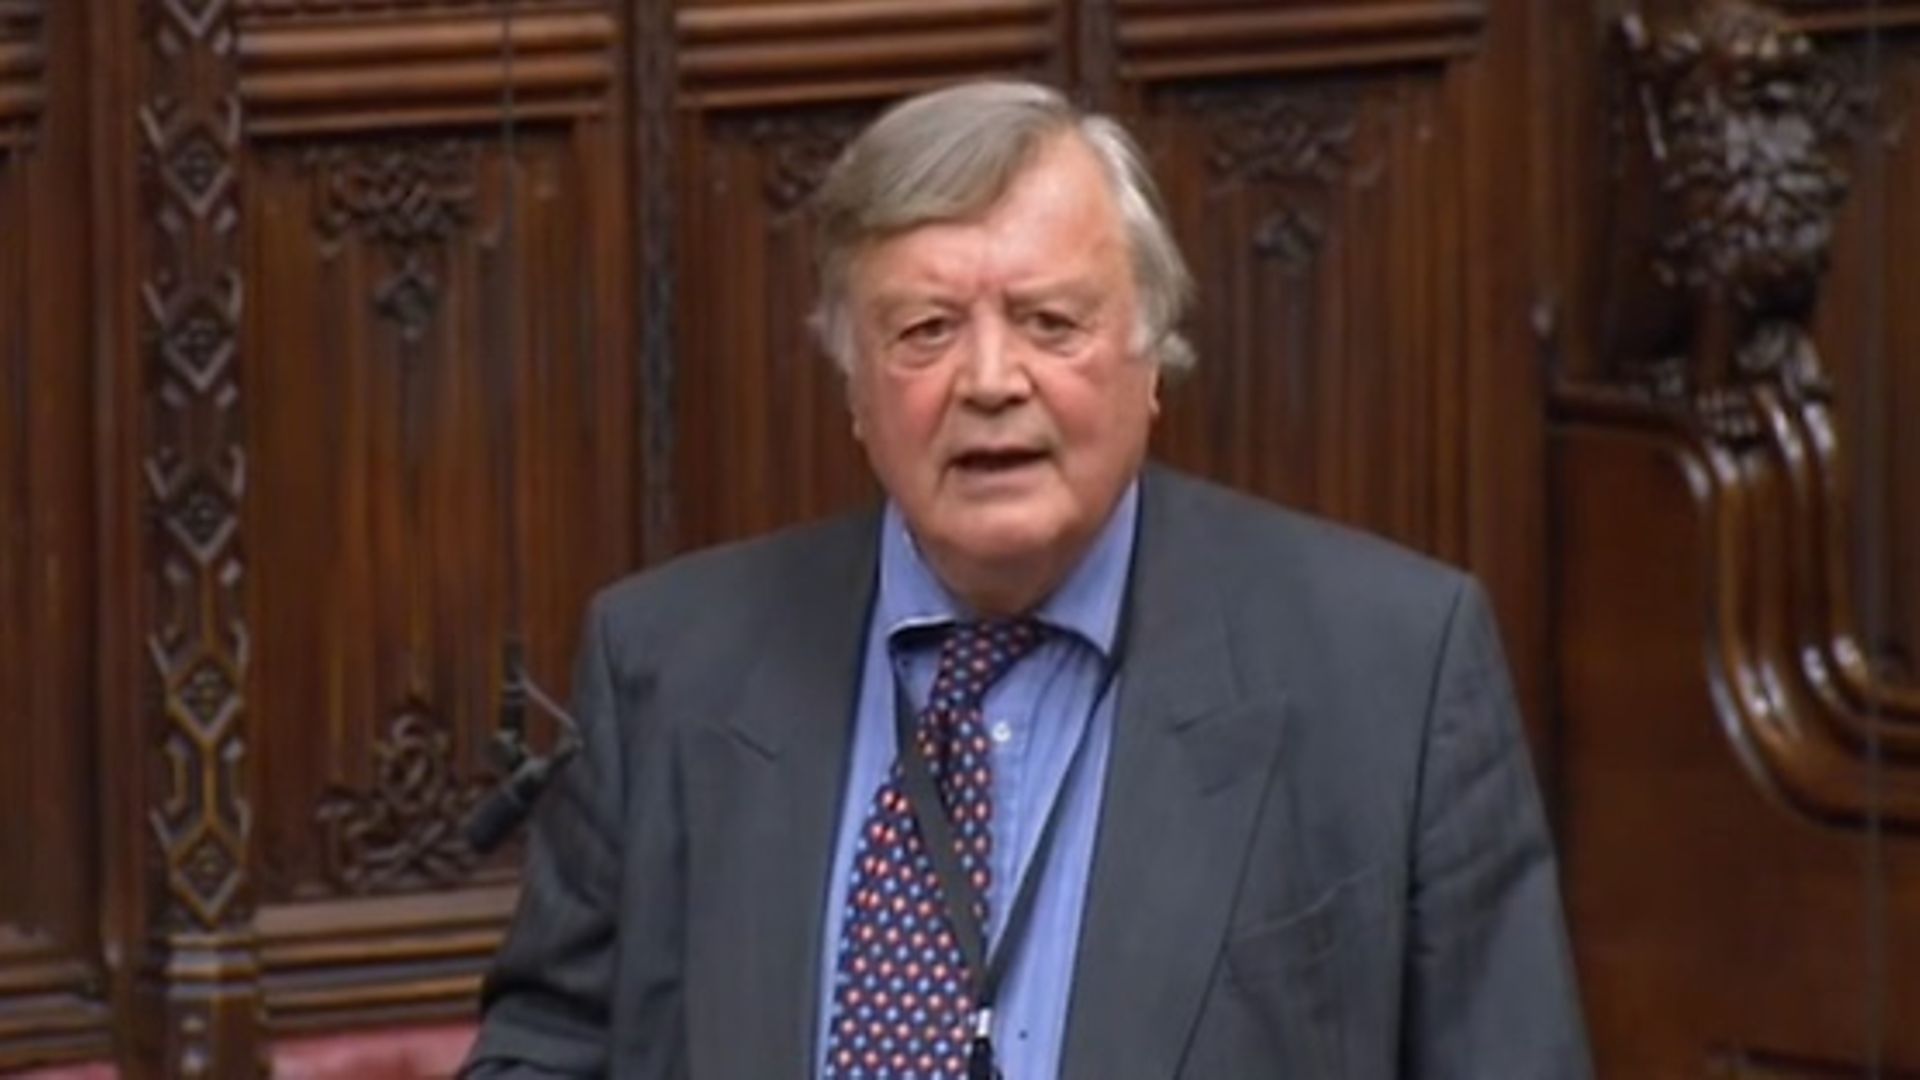 Ken Clarke in the House of Lords - Credit: Parliament Live